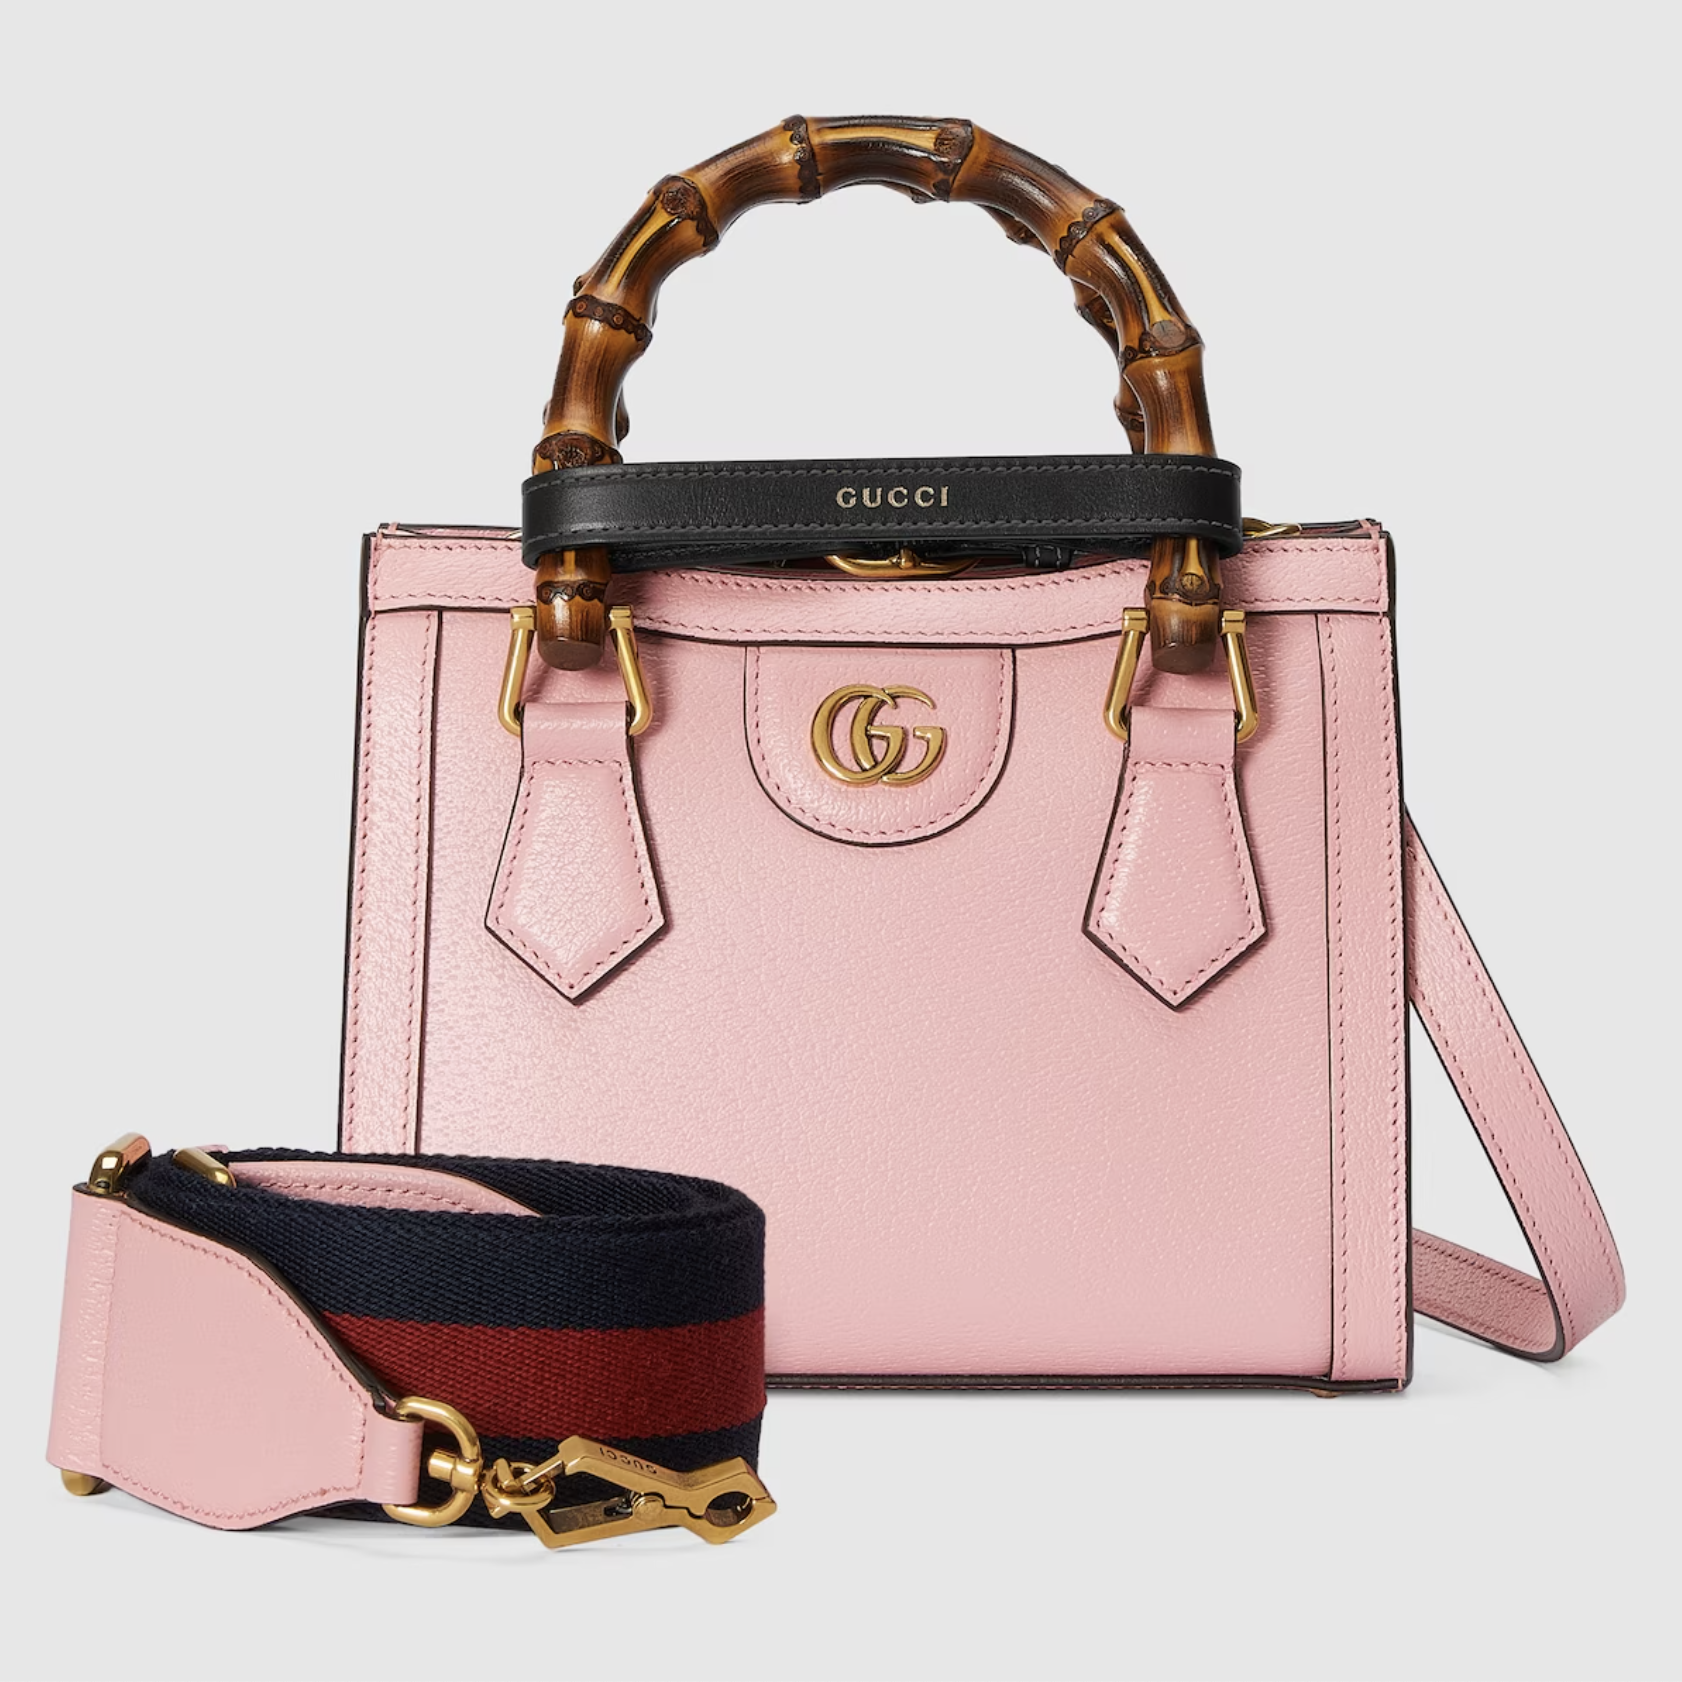 <p><strong>$3300.00</strong></p><p><a href="https://go.redirectingat.com?id=74968X1553576&url=https%3A%2F%2Fwww.gucci.com%2Fus%2Fen%2Fpr%2Fwomen%2Fhandbags%2Fshoulder-bags-for-women%2Fgucci-diana-mini-tote-bag-p-702732U3ZDT5479&sref=https%3A%2F%2Fwww.veranda.com%2Fluxury-lifestyle%2Fluxury-fashion-jewelry%2Fg46245229%2Fbest-designer-tote-bags%2F">Shop Now</a></p><p>What teeny-tiny totes lack in storage, they make up for in panache. Gucci’s Diana tote (named for the late Princess of Wales) expertly contrasts whimsical shades of leather with a polished bamboo handle and a removable crossbody strap. Carry this when you’re spending an entire day out and need only your essentials—or sling it over a larger neutral tote for contrast.</p><p><strong>Colors:</strong> Pink, white, green, beige</p><p><strong>Materials: </strong>Leather, bamboo</p>